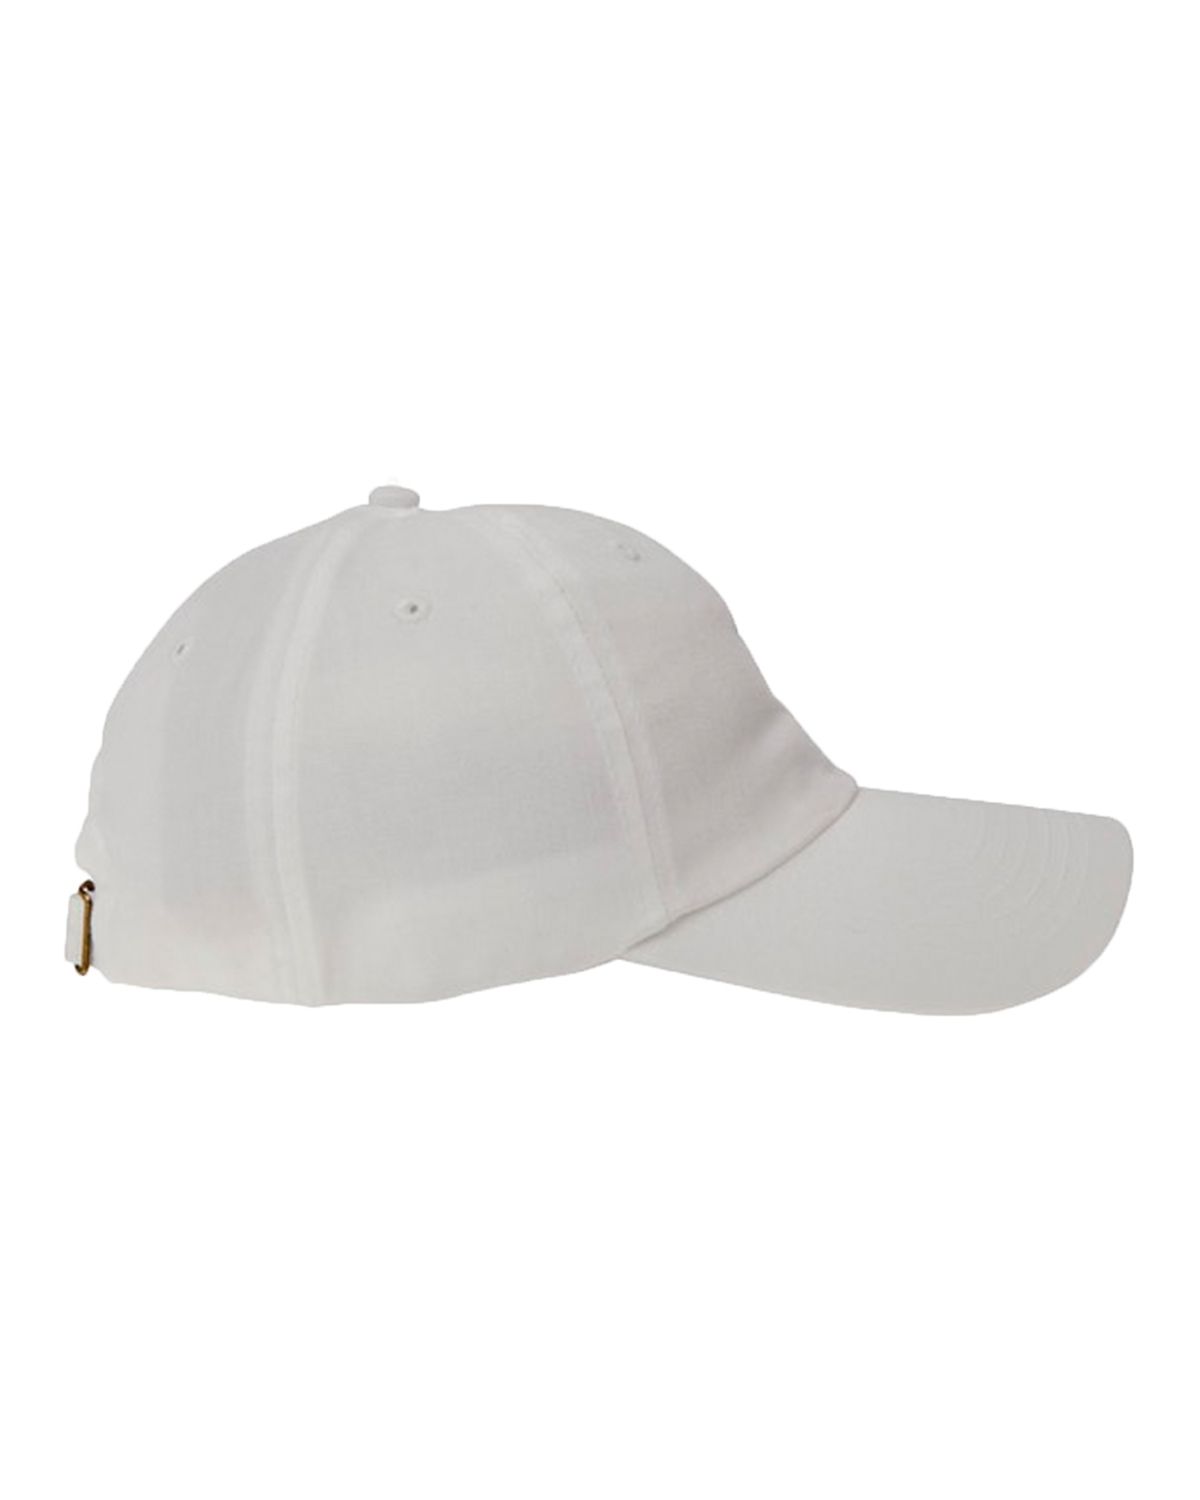 Reviews about Big Accessories BX001 6-Panel Brushed Twill Unstructured Cap